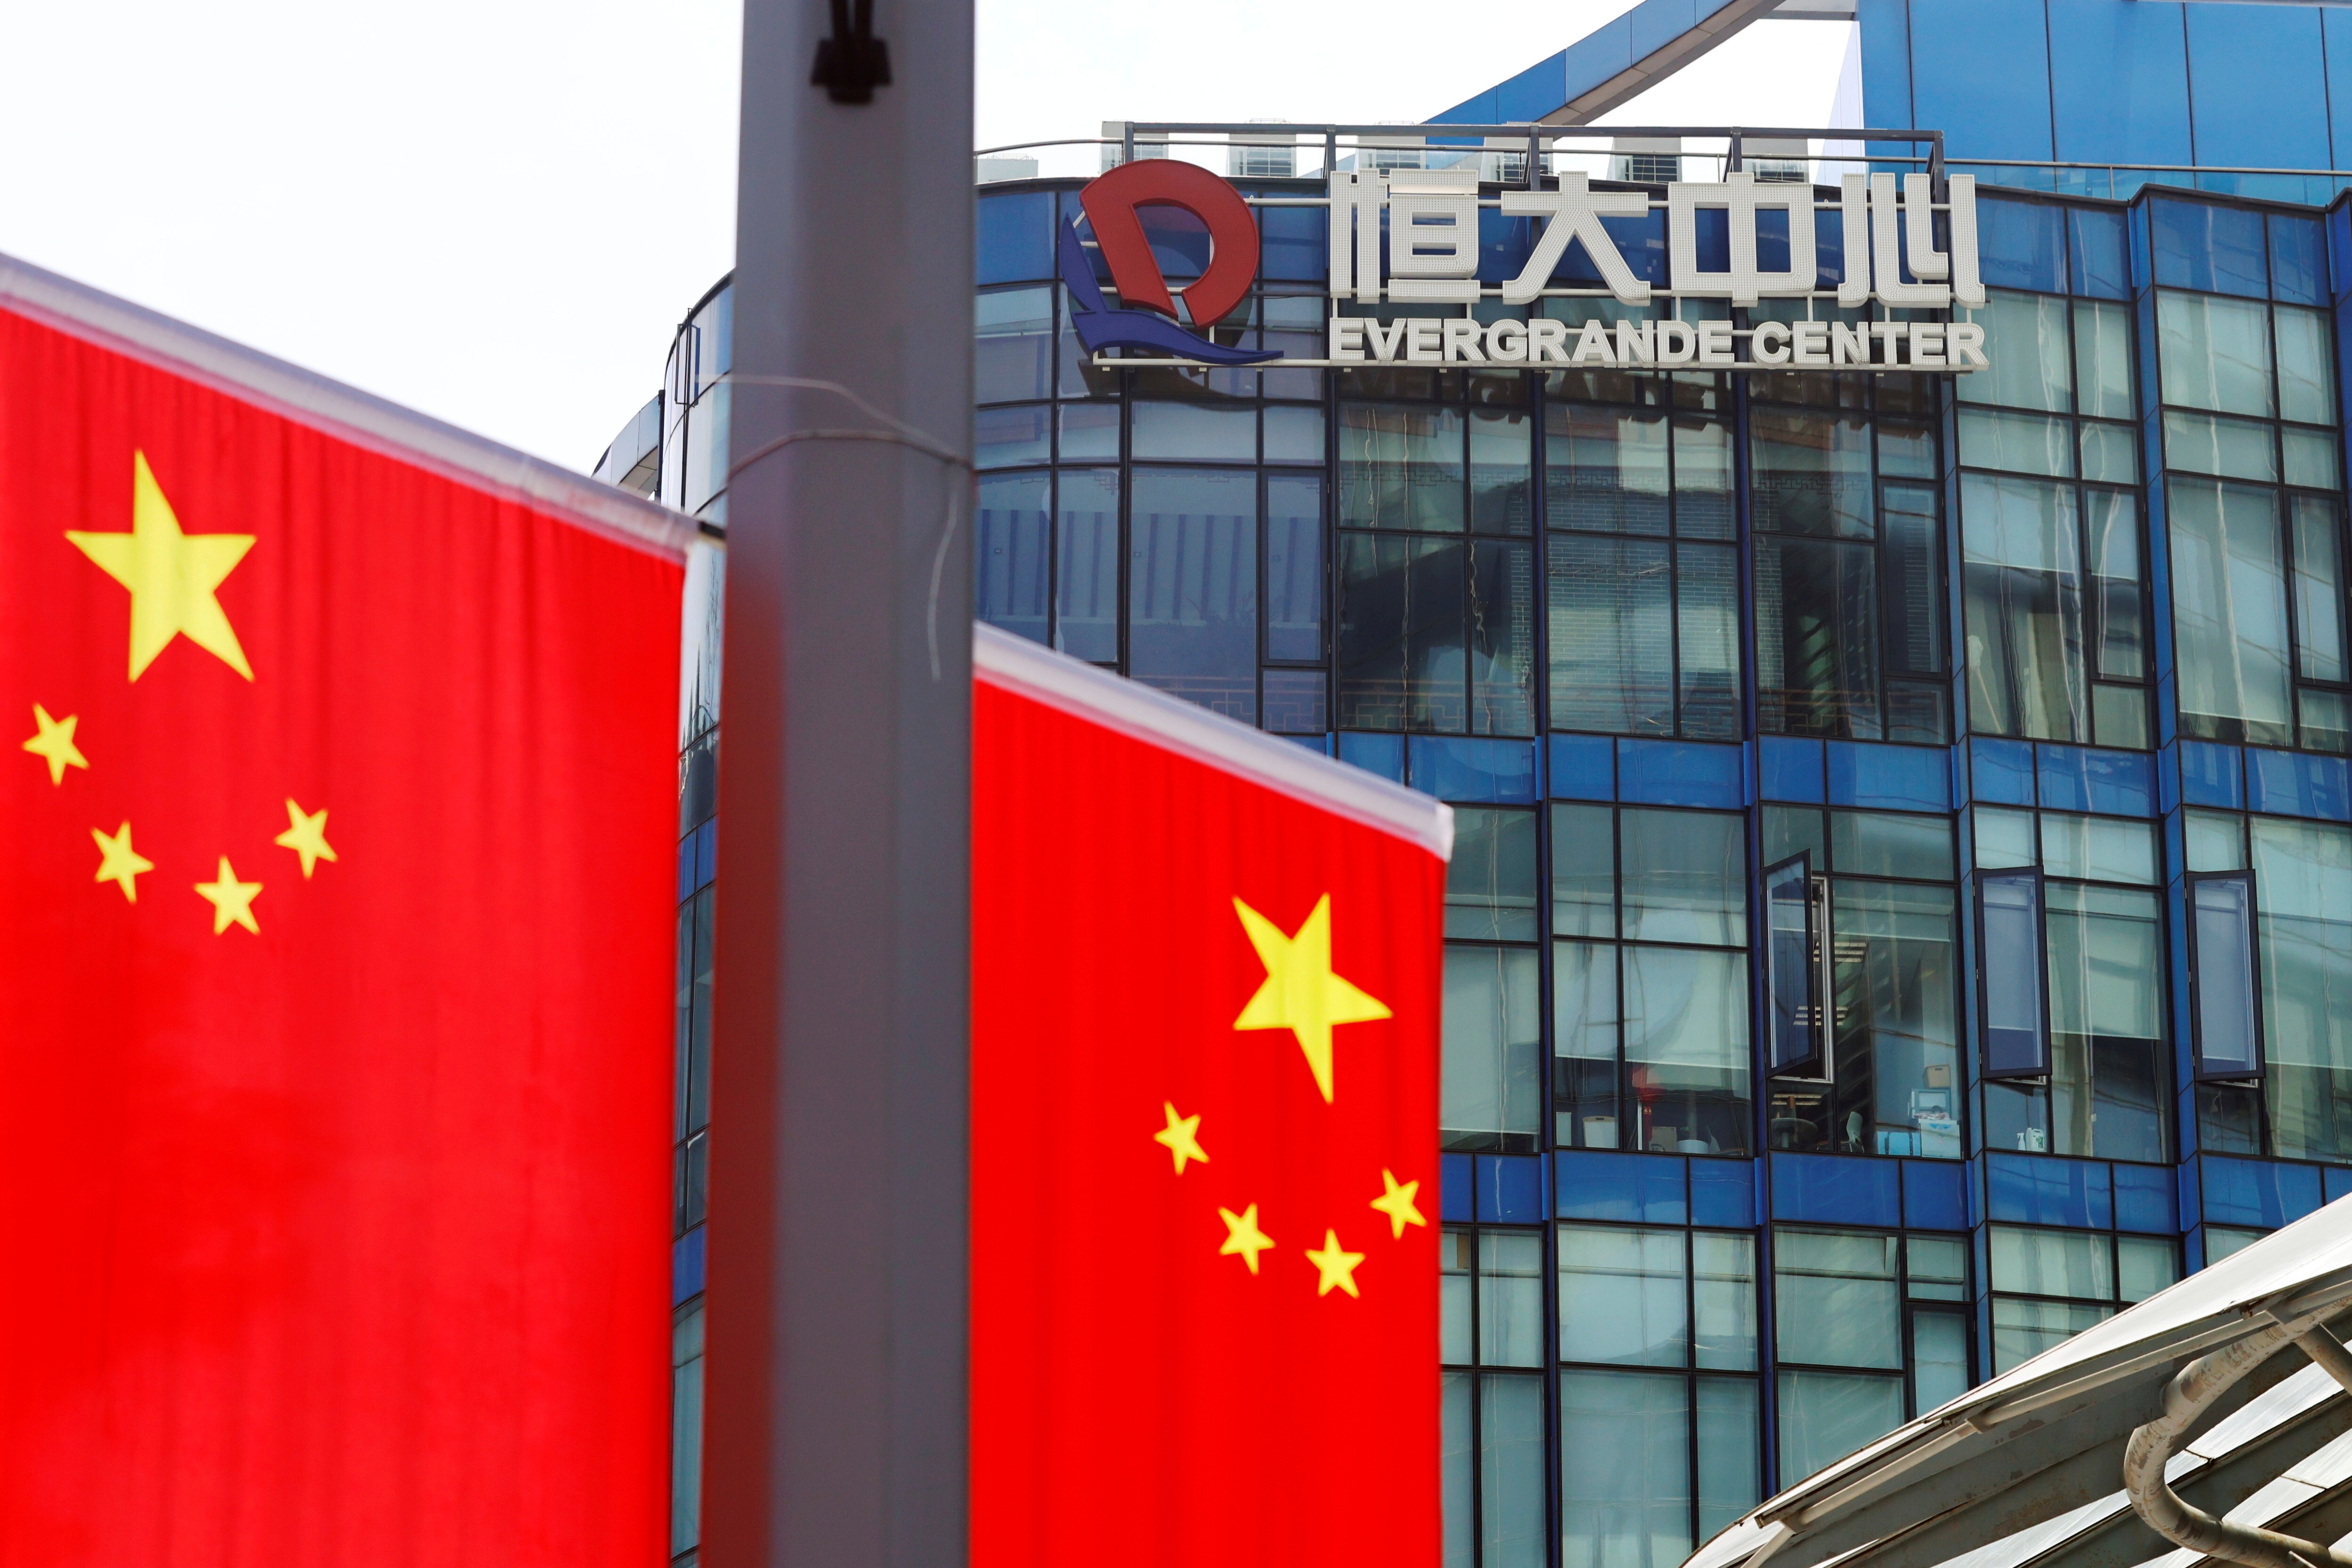 The debt issues of property developer Evergrande have highlighted risks to the Chinese economy. Photo: Reuters